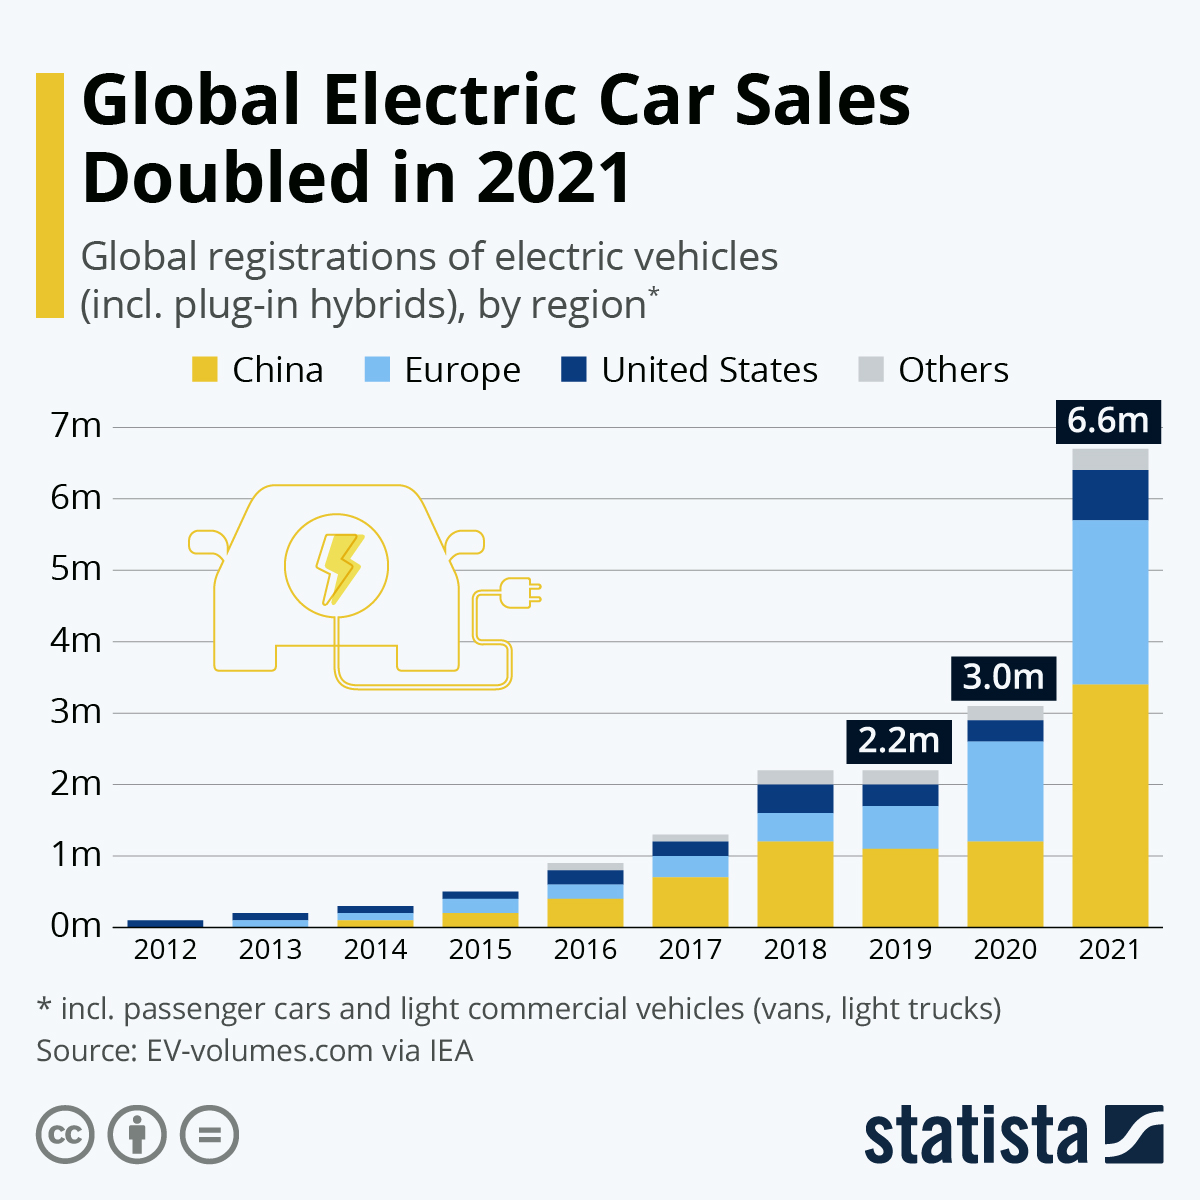 Global Electric Car Sales Doubled in 2021